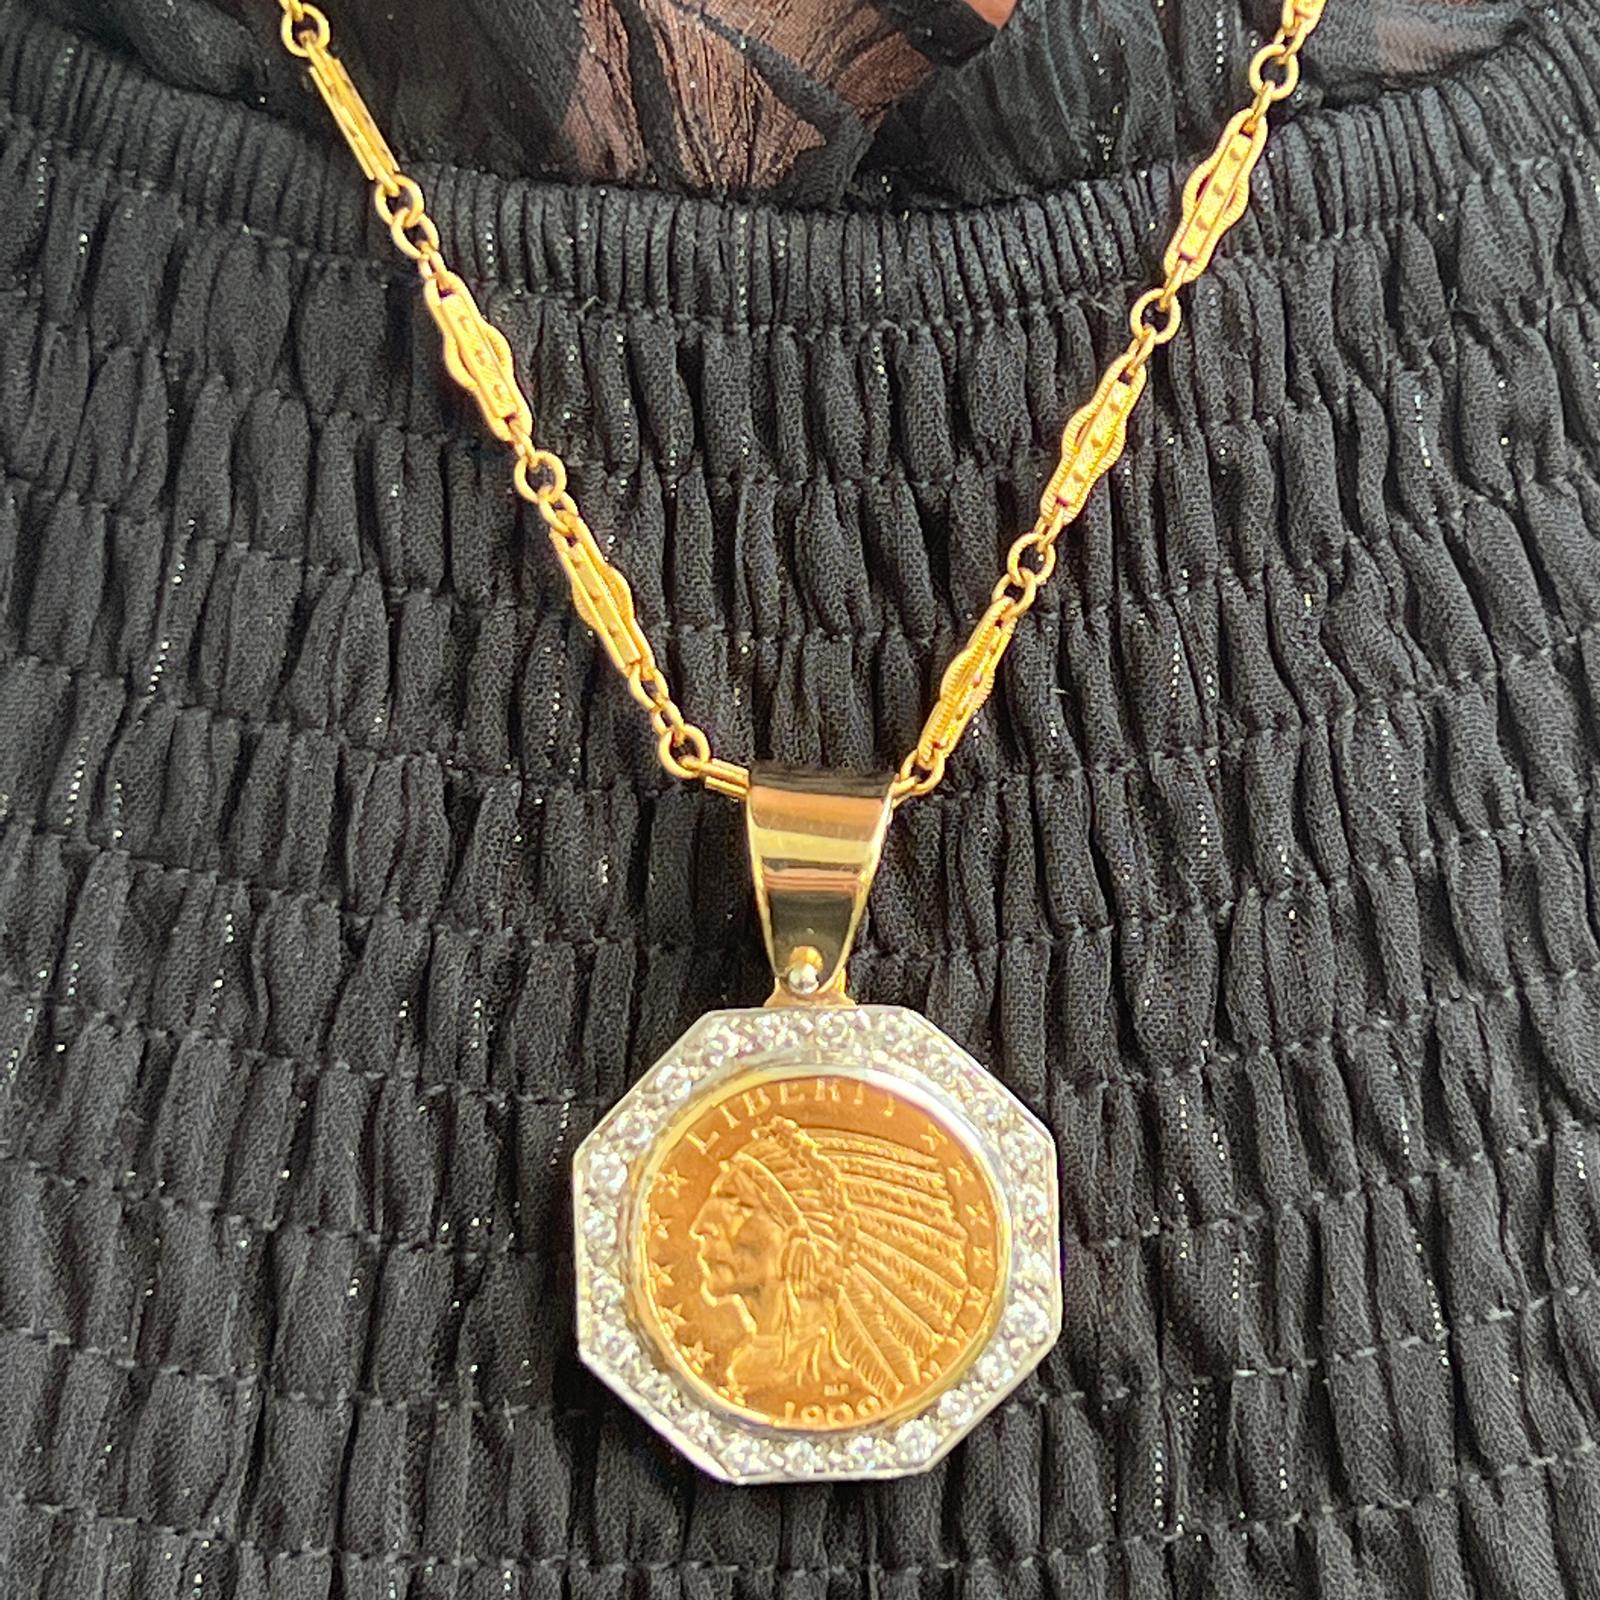 Diamond frame coin pendant crafted in 14 karat yellow gold. The original $10 Indian Head Coin (90% gold) is held in an octagonal diamond frame. The 24 round briliant cut diamonds weigh approximately 1.10 CTW. The pendant measures 1.60 inches in